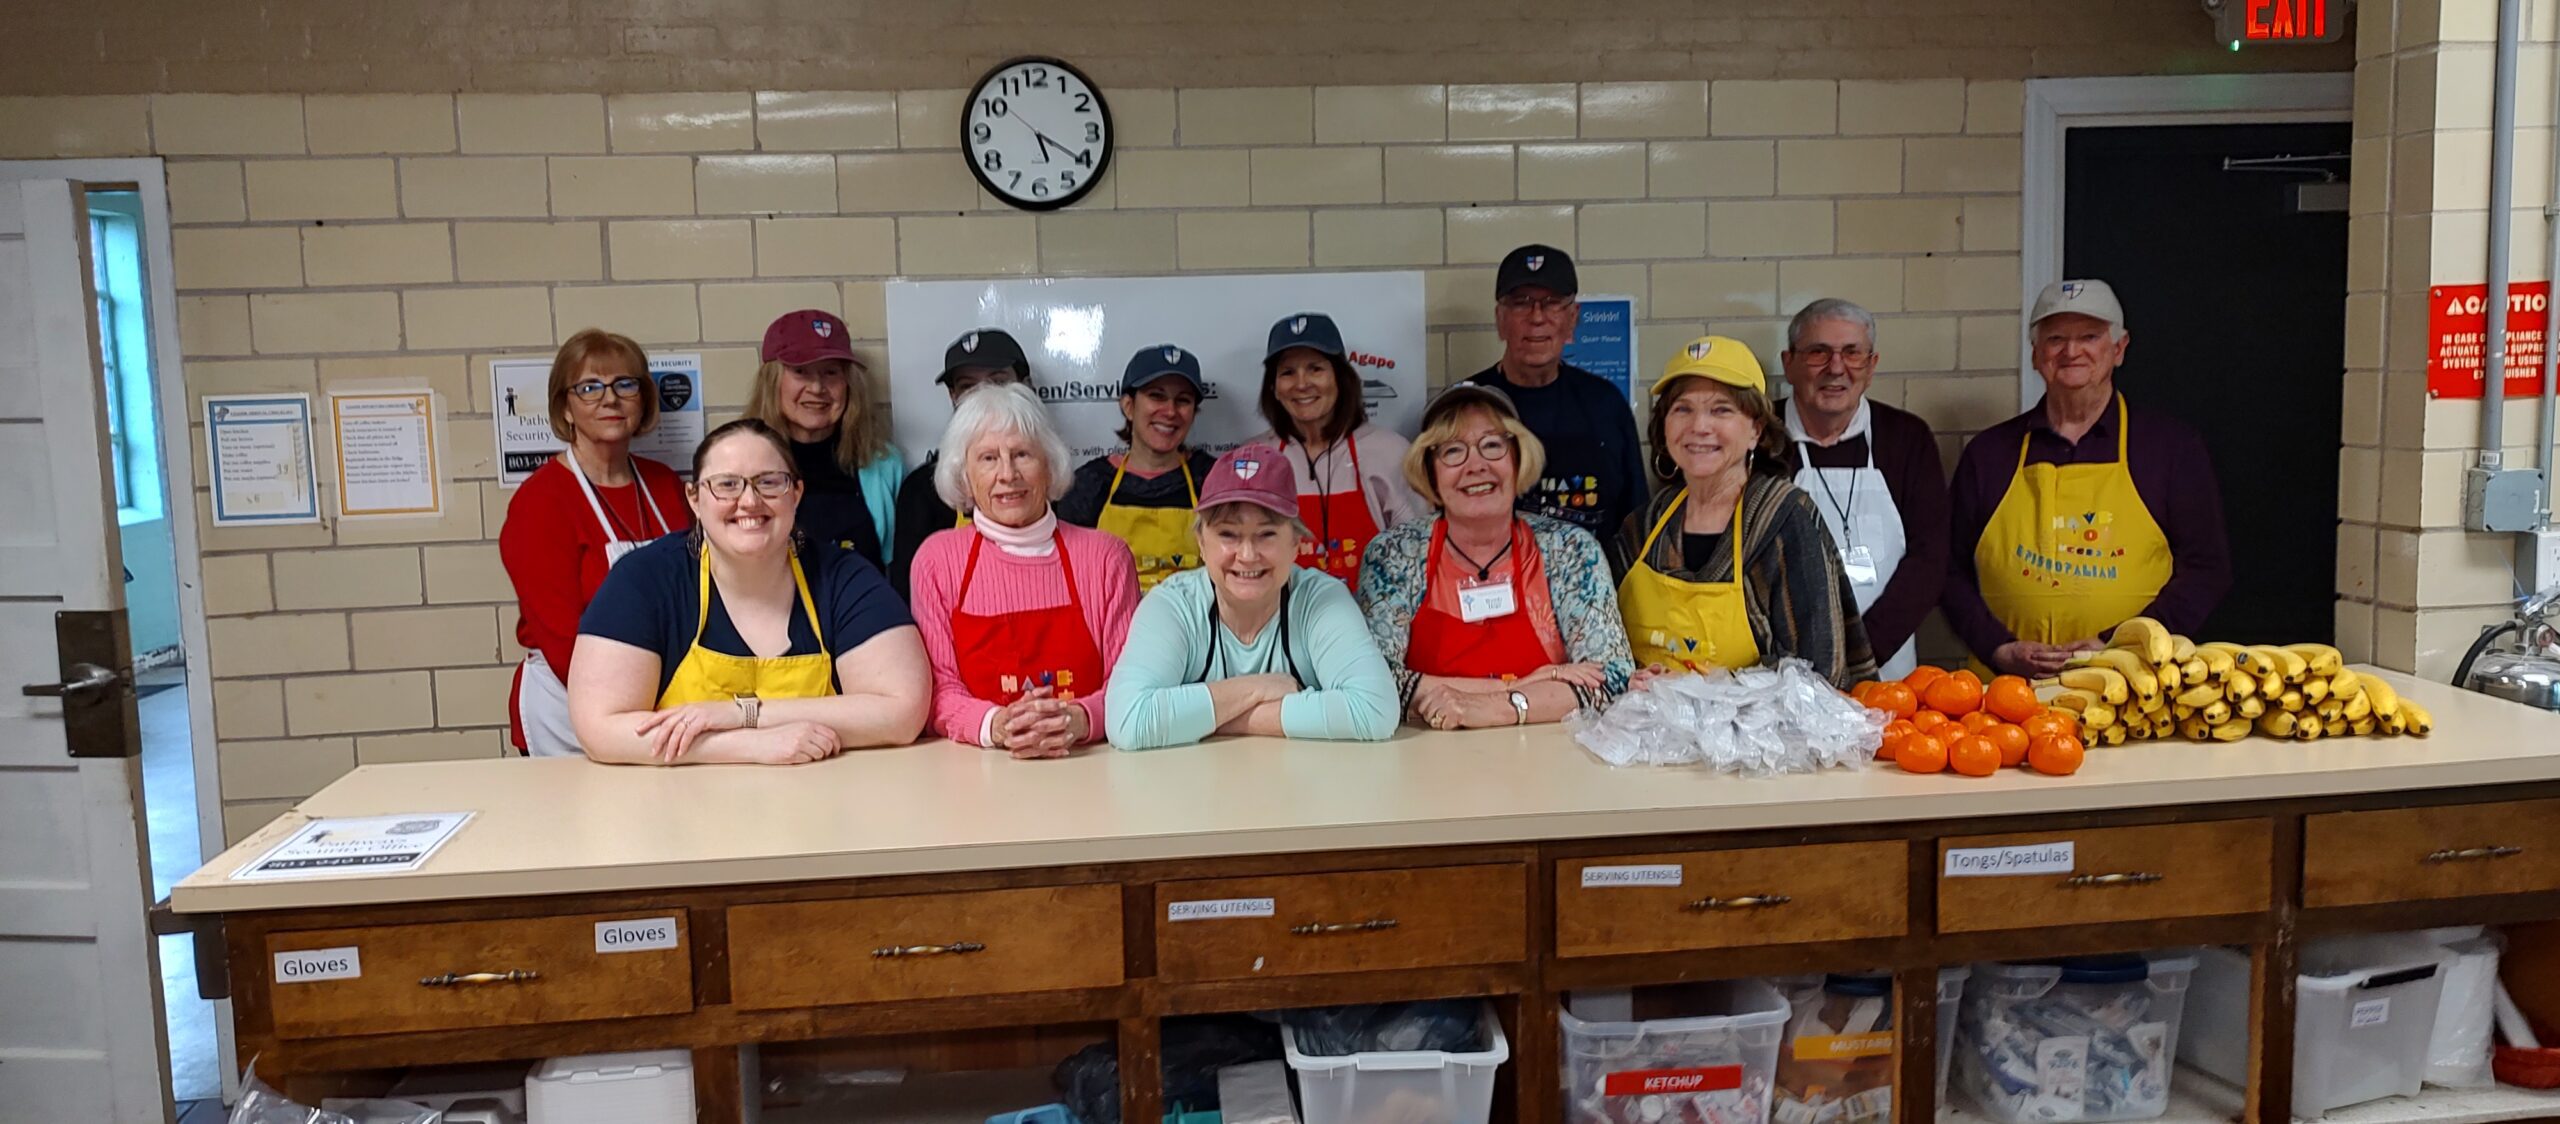 a group of people wearing aprons posing for a photo